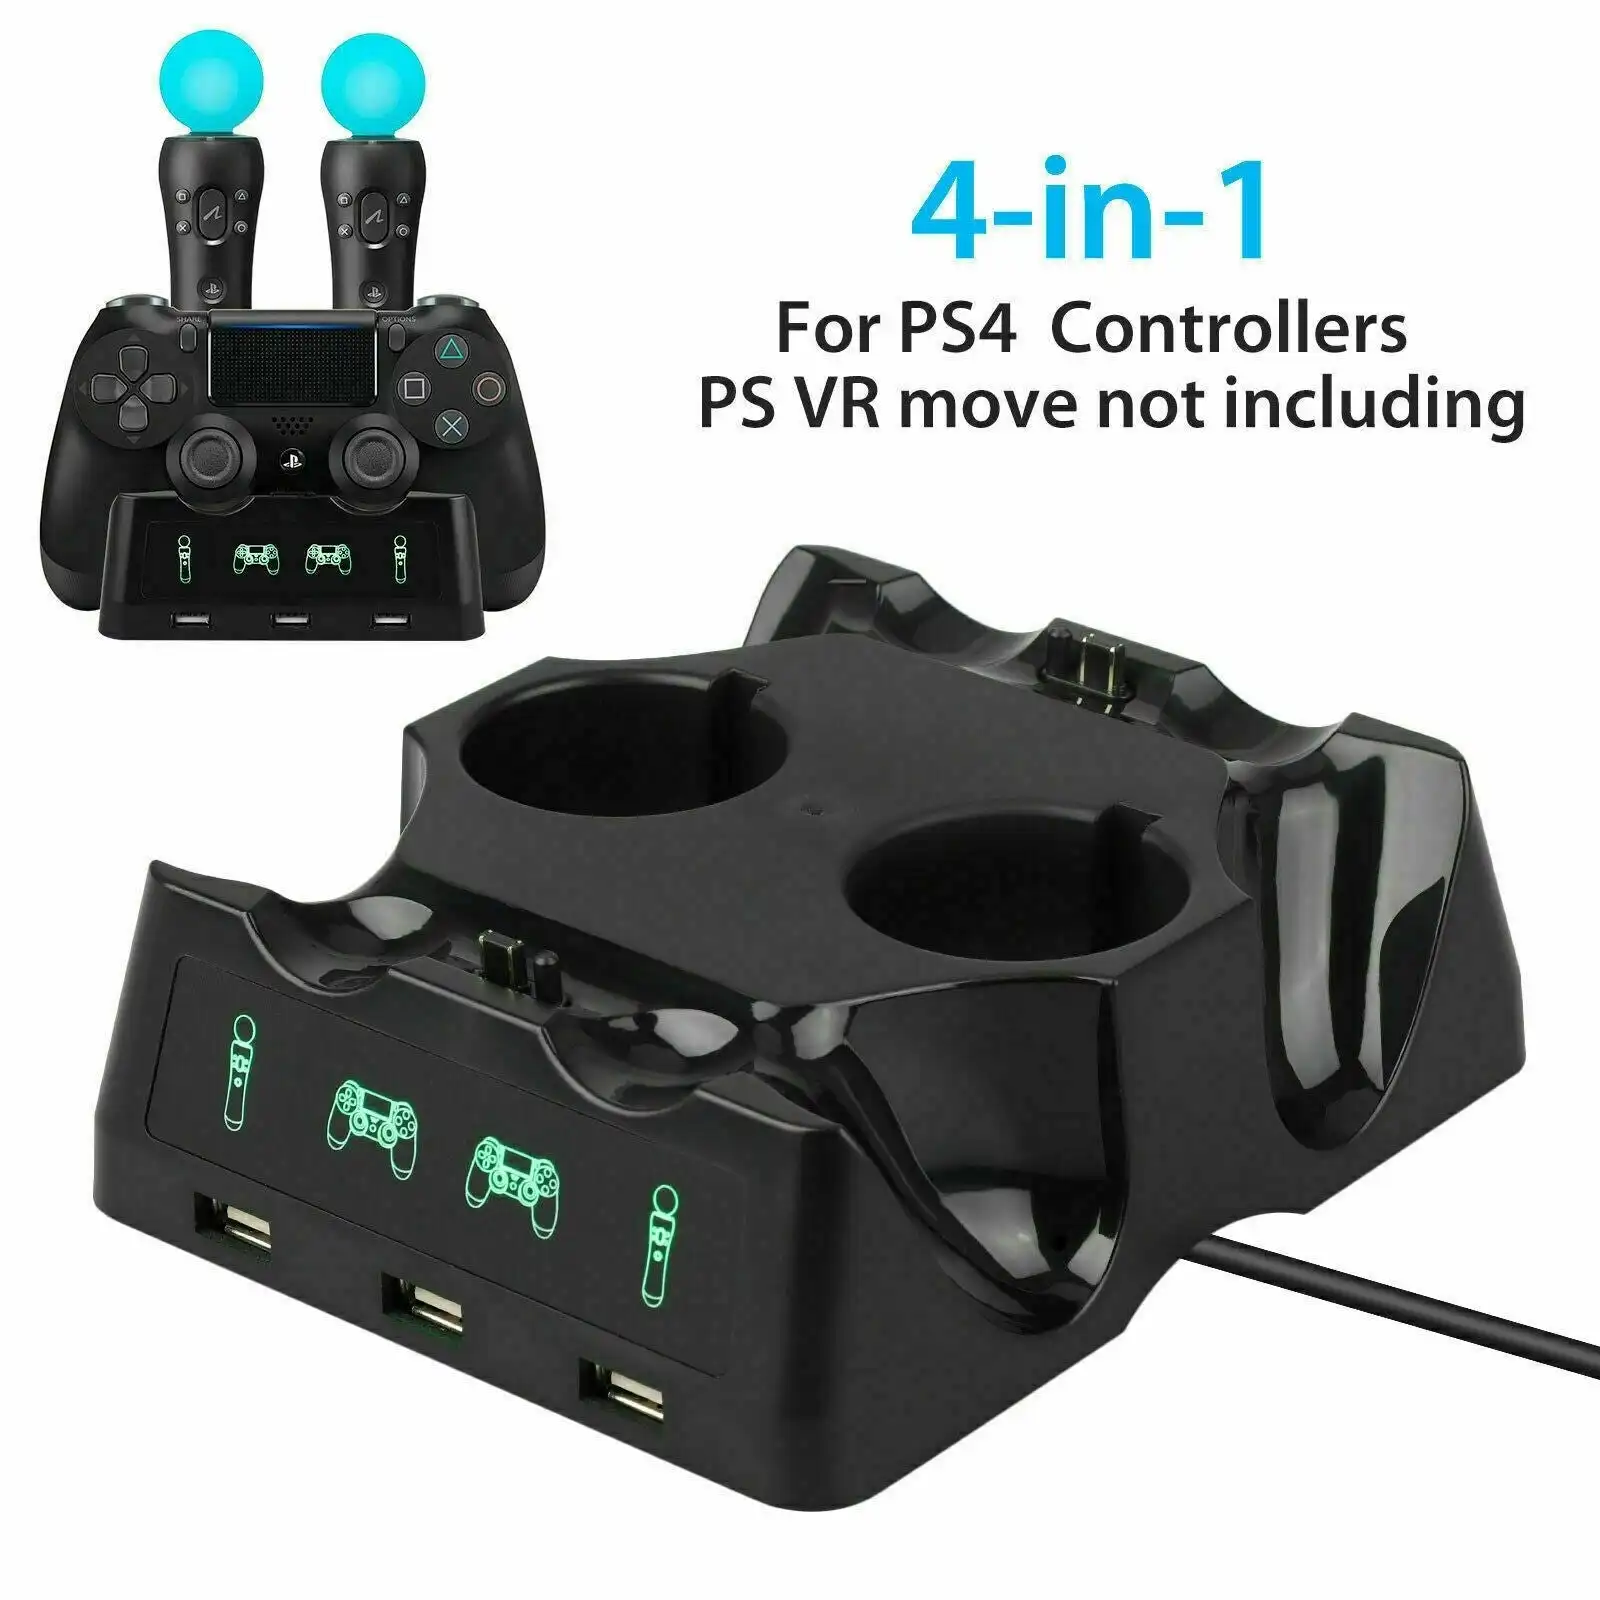 4 in 1 Charging Dock Compatible For Sony PS4 Playstation 4 VR PSVR Move Controllers